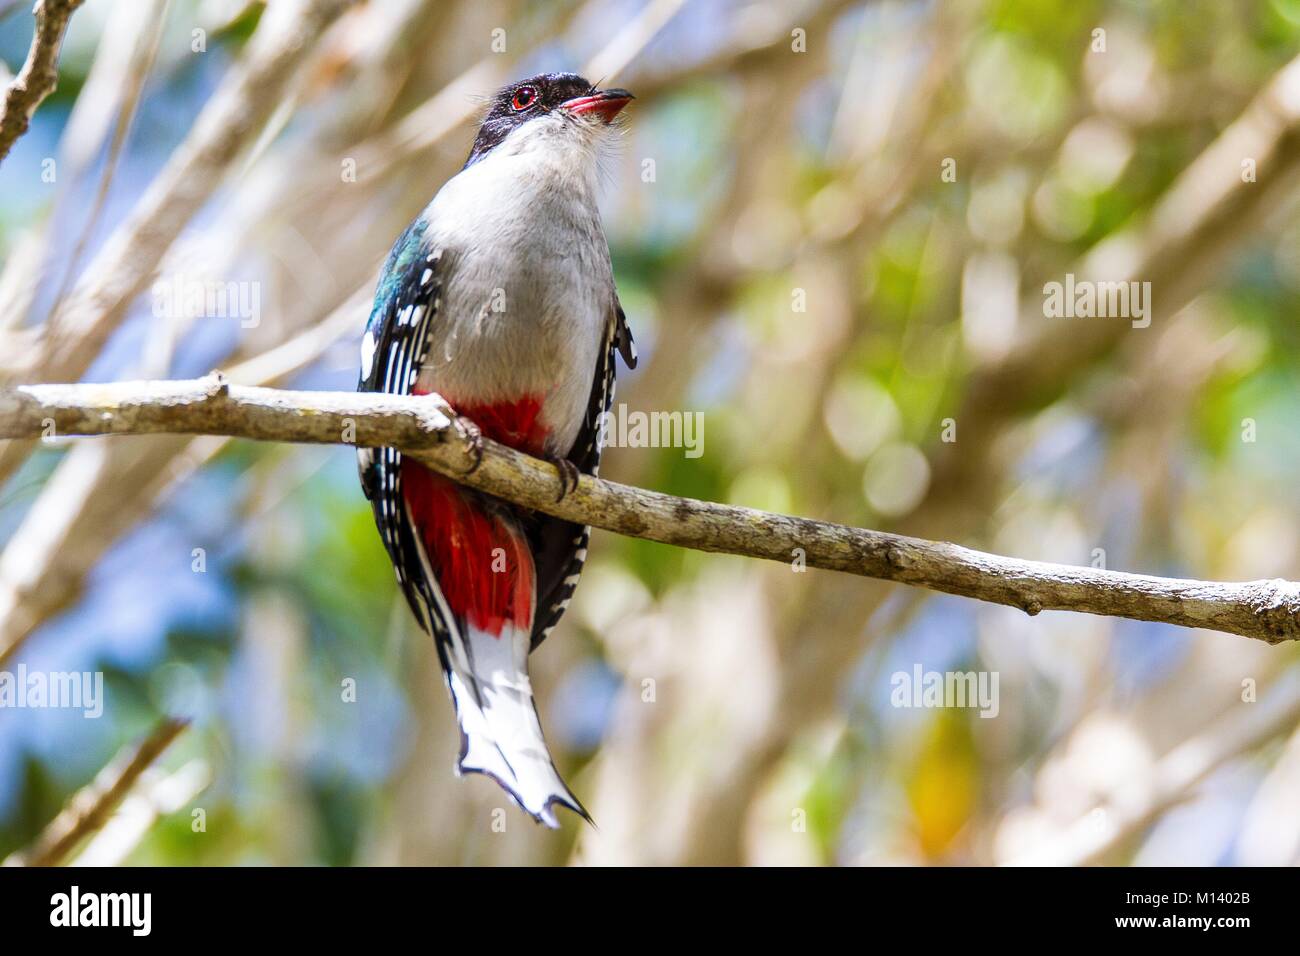 Cuba, province of Sancti Spiritus, the National Park of Caguanes, Trogon of Cuba or Tocororo (Priotelus temnurus), endemic in Cuba, it is the national bird for its colors reminding those of the Cuban flag Stock Photo